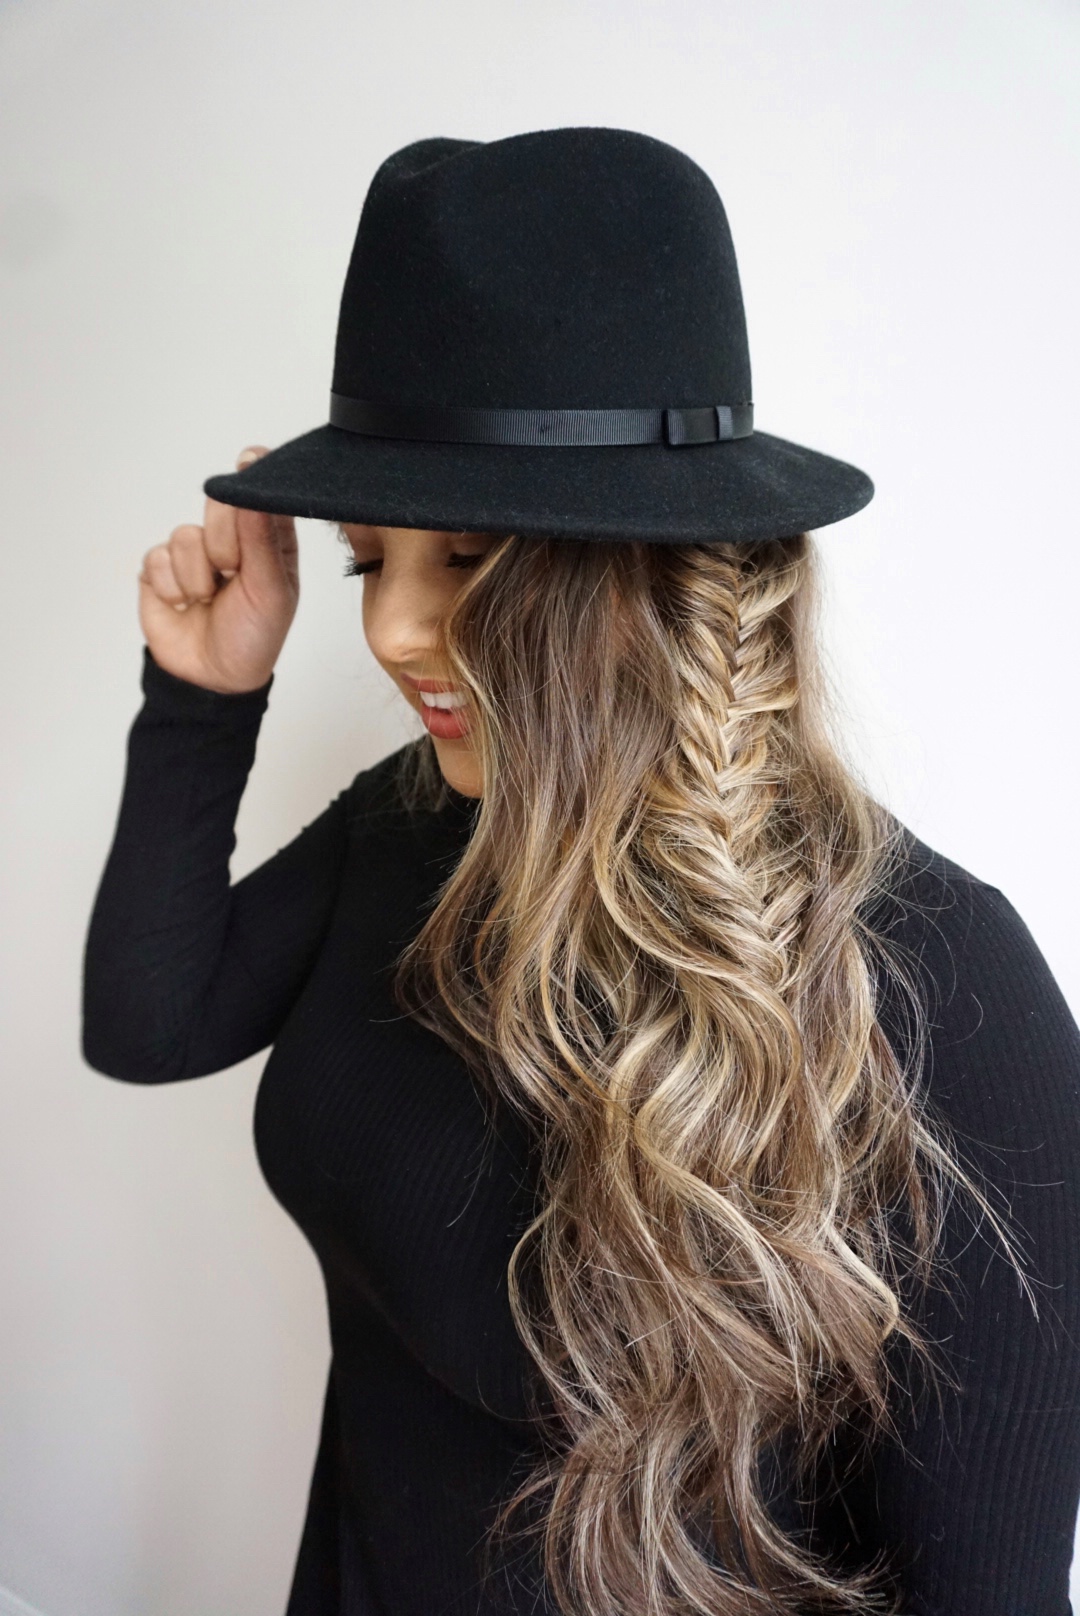 28+ Cute hairstyles with a hat ideas in 2022 